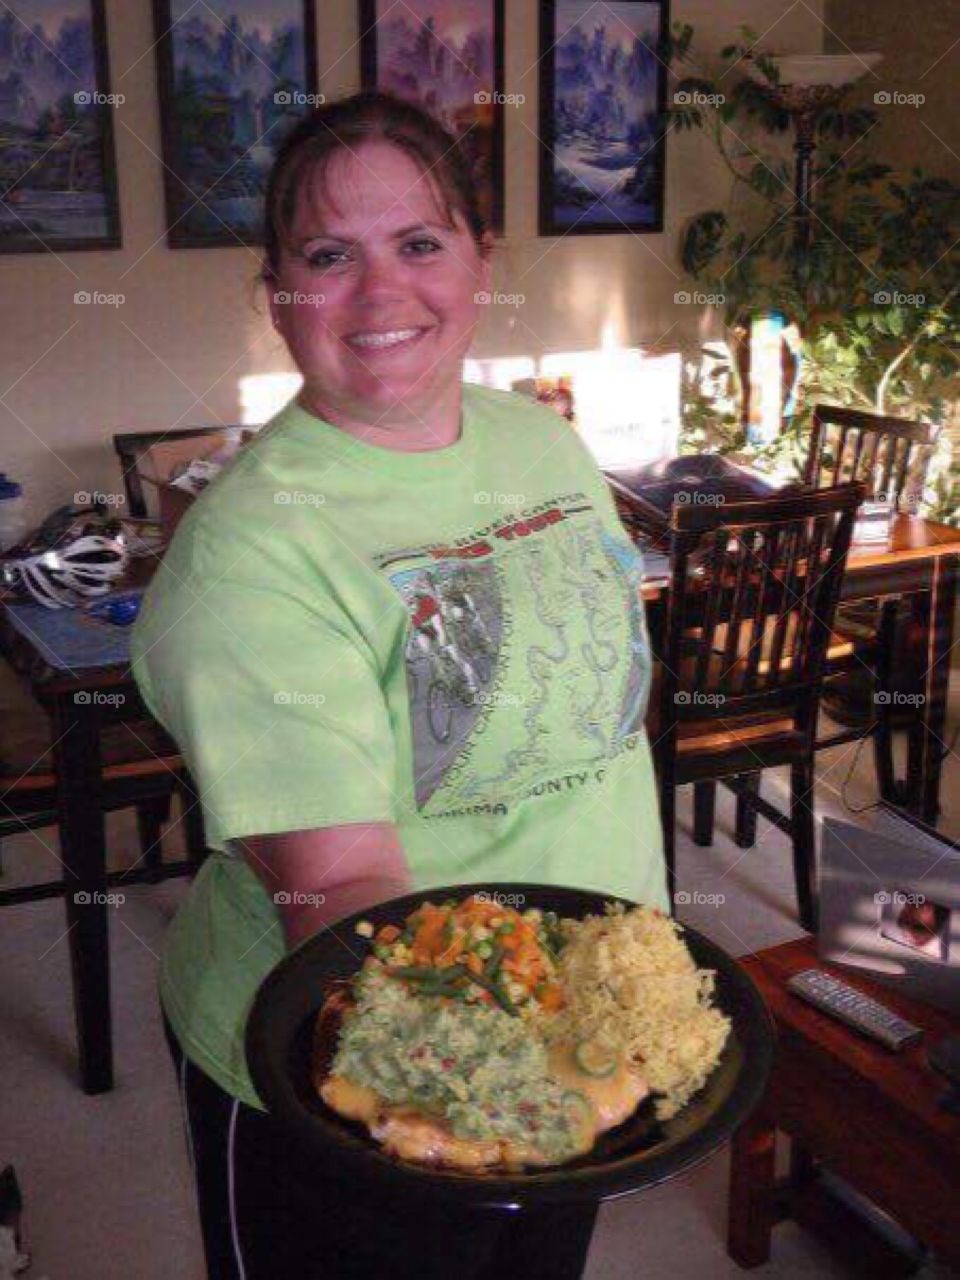 Smiling woman holding delicious food in plate